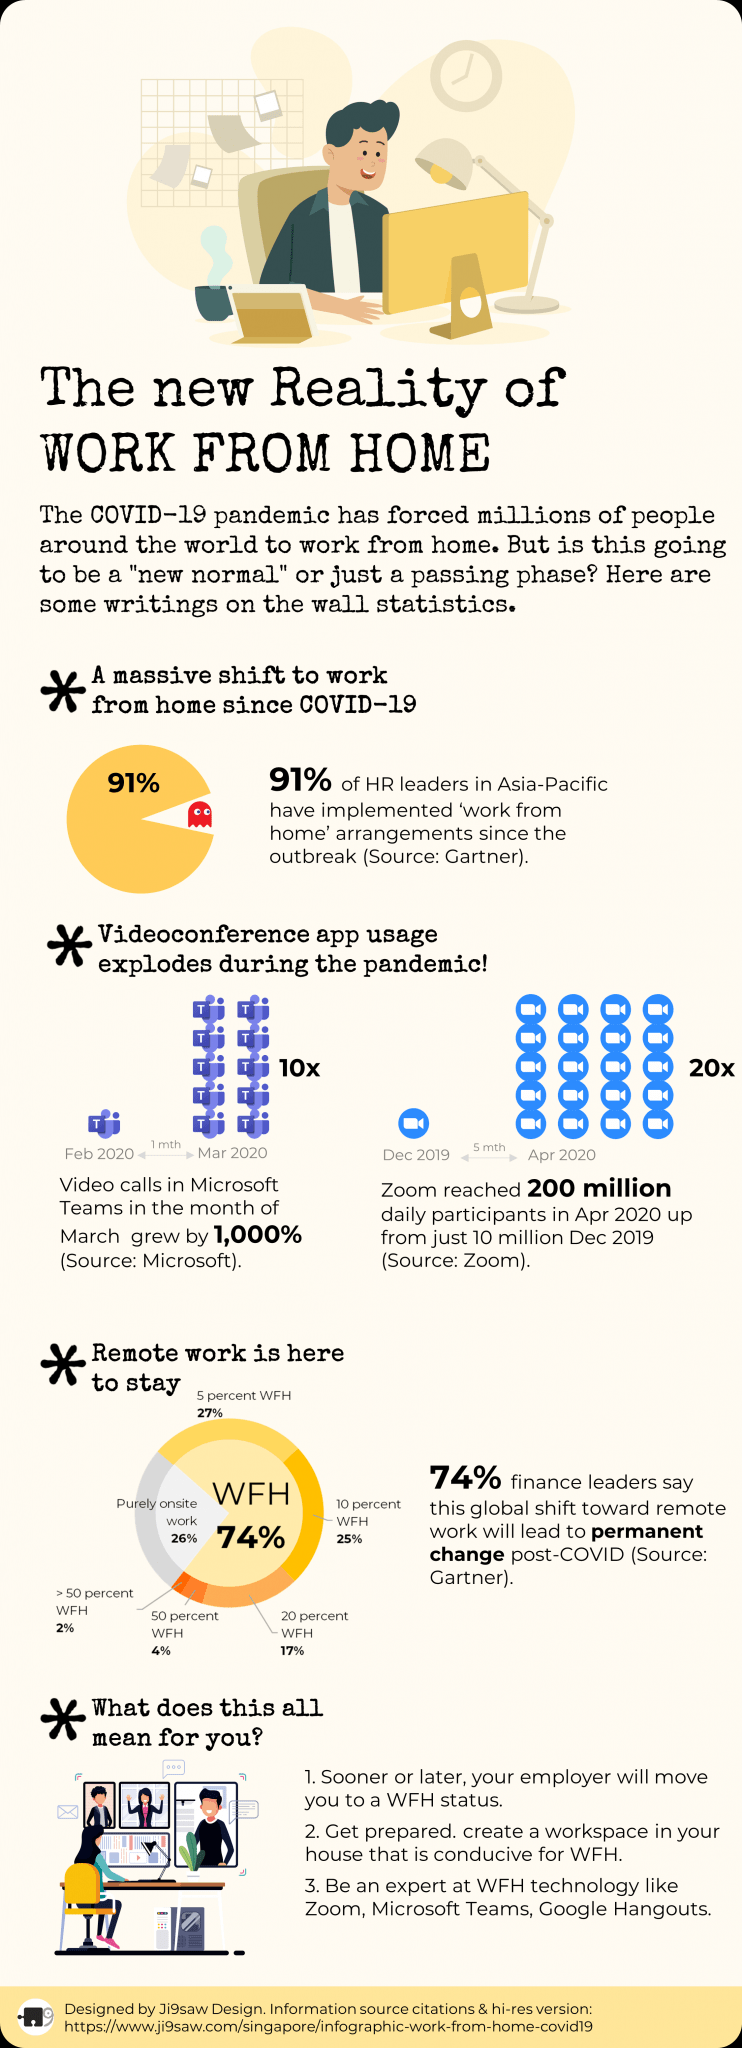 Infographic: The new Reality of Work From Home Post COVID-19